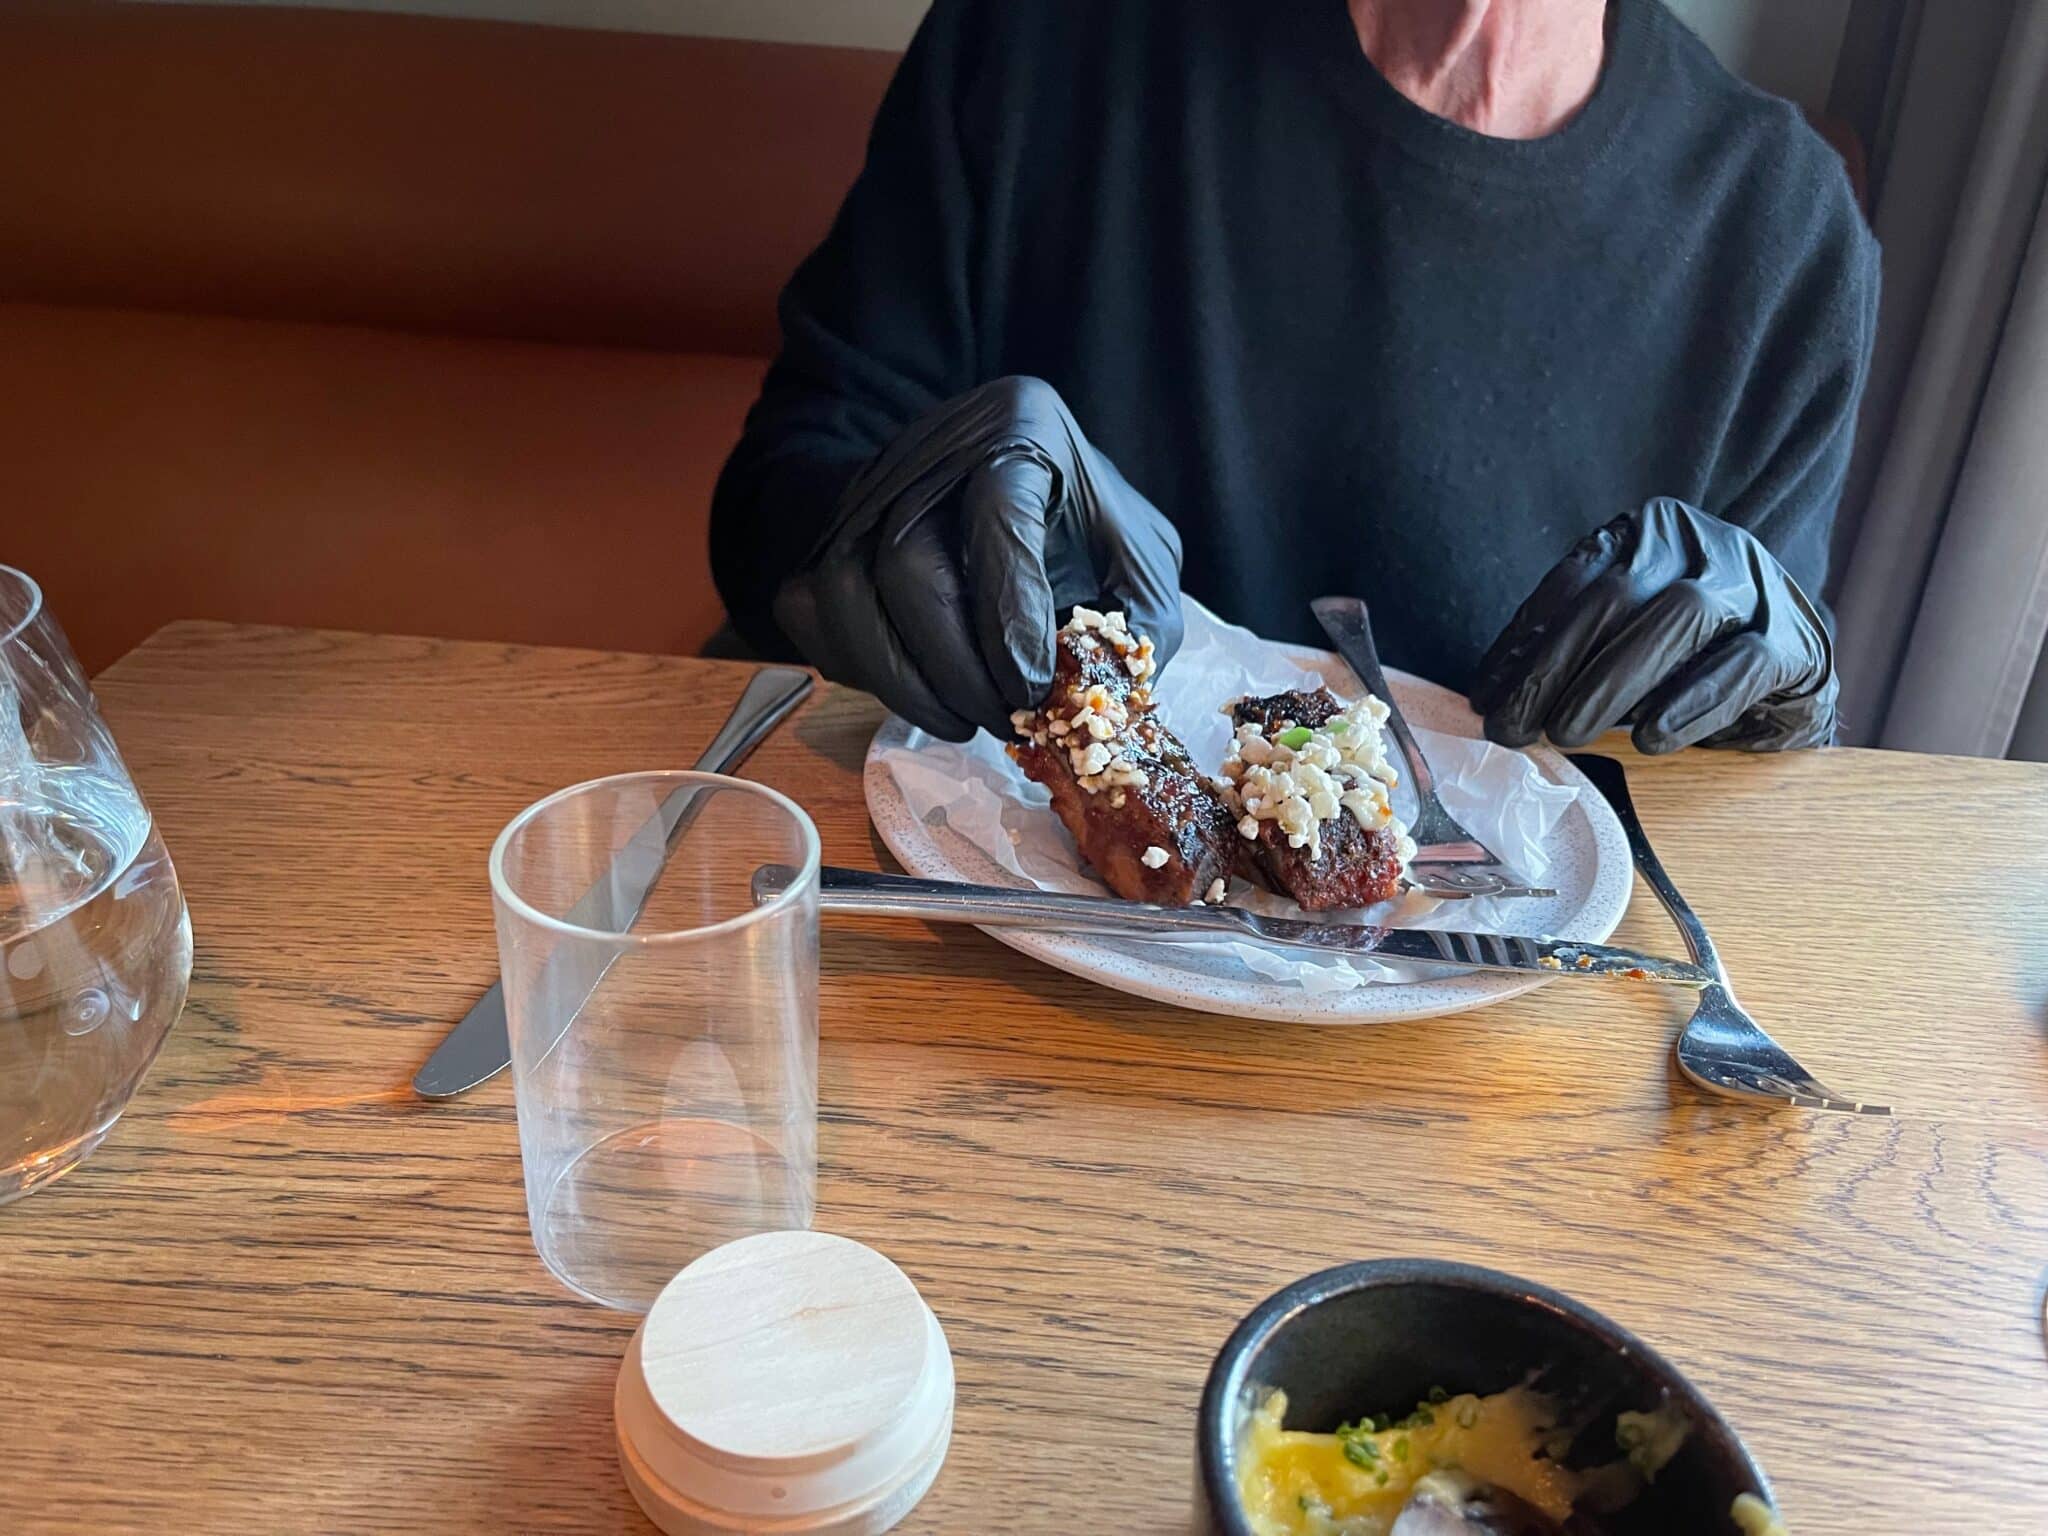 Nick Taylor was given rubber gloves to eat messy ribs.